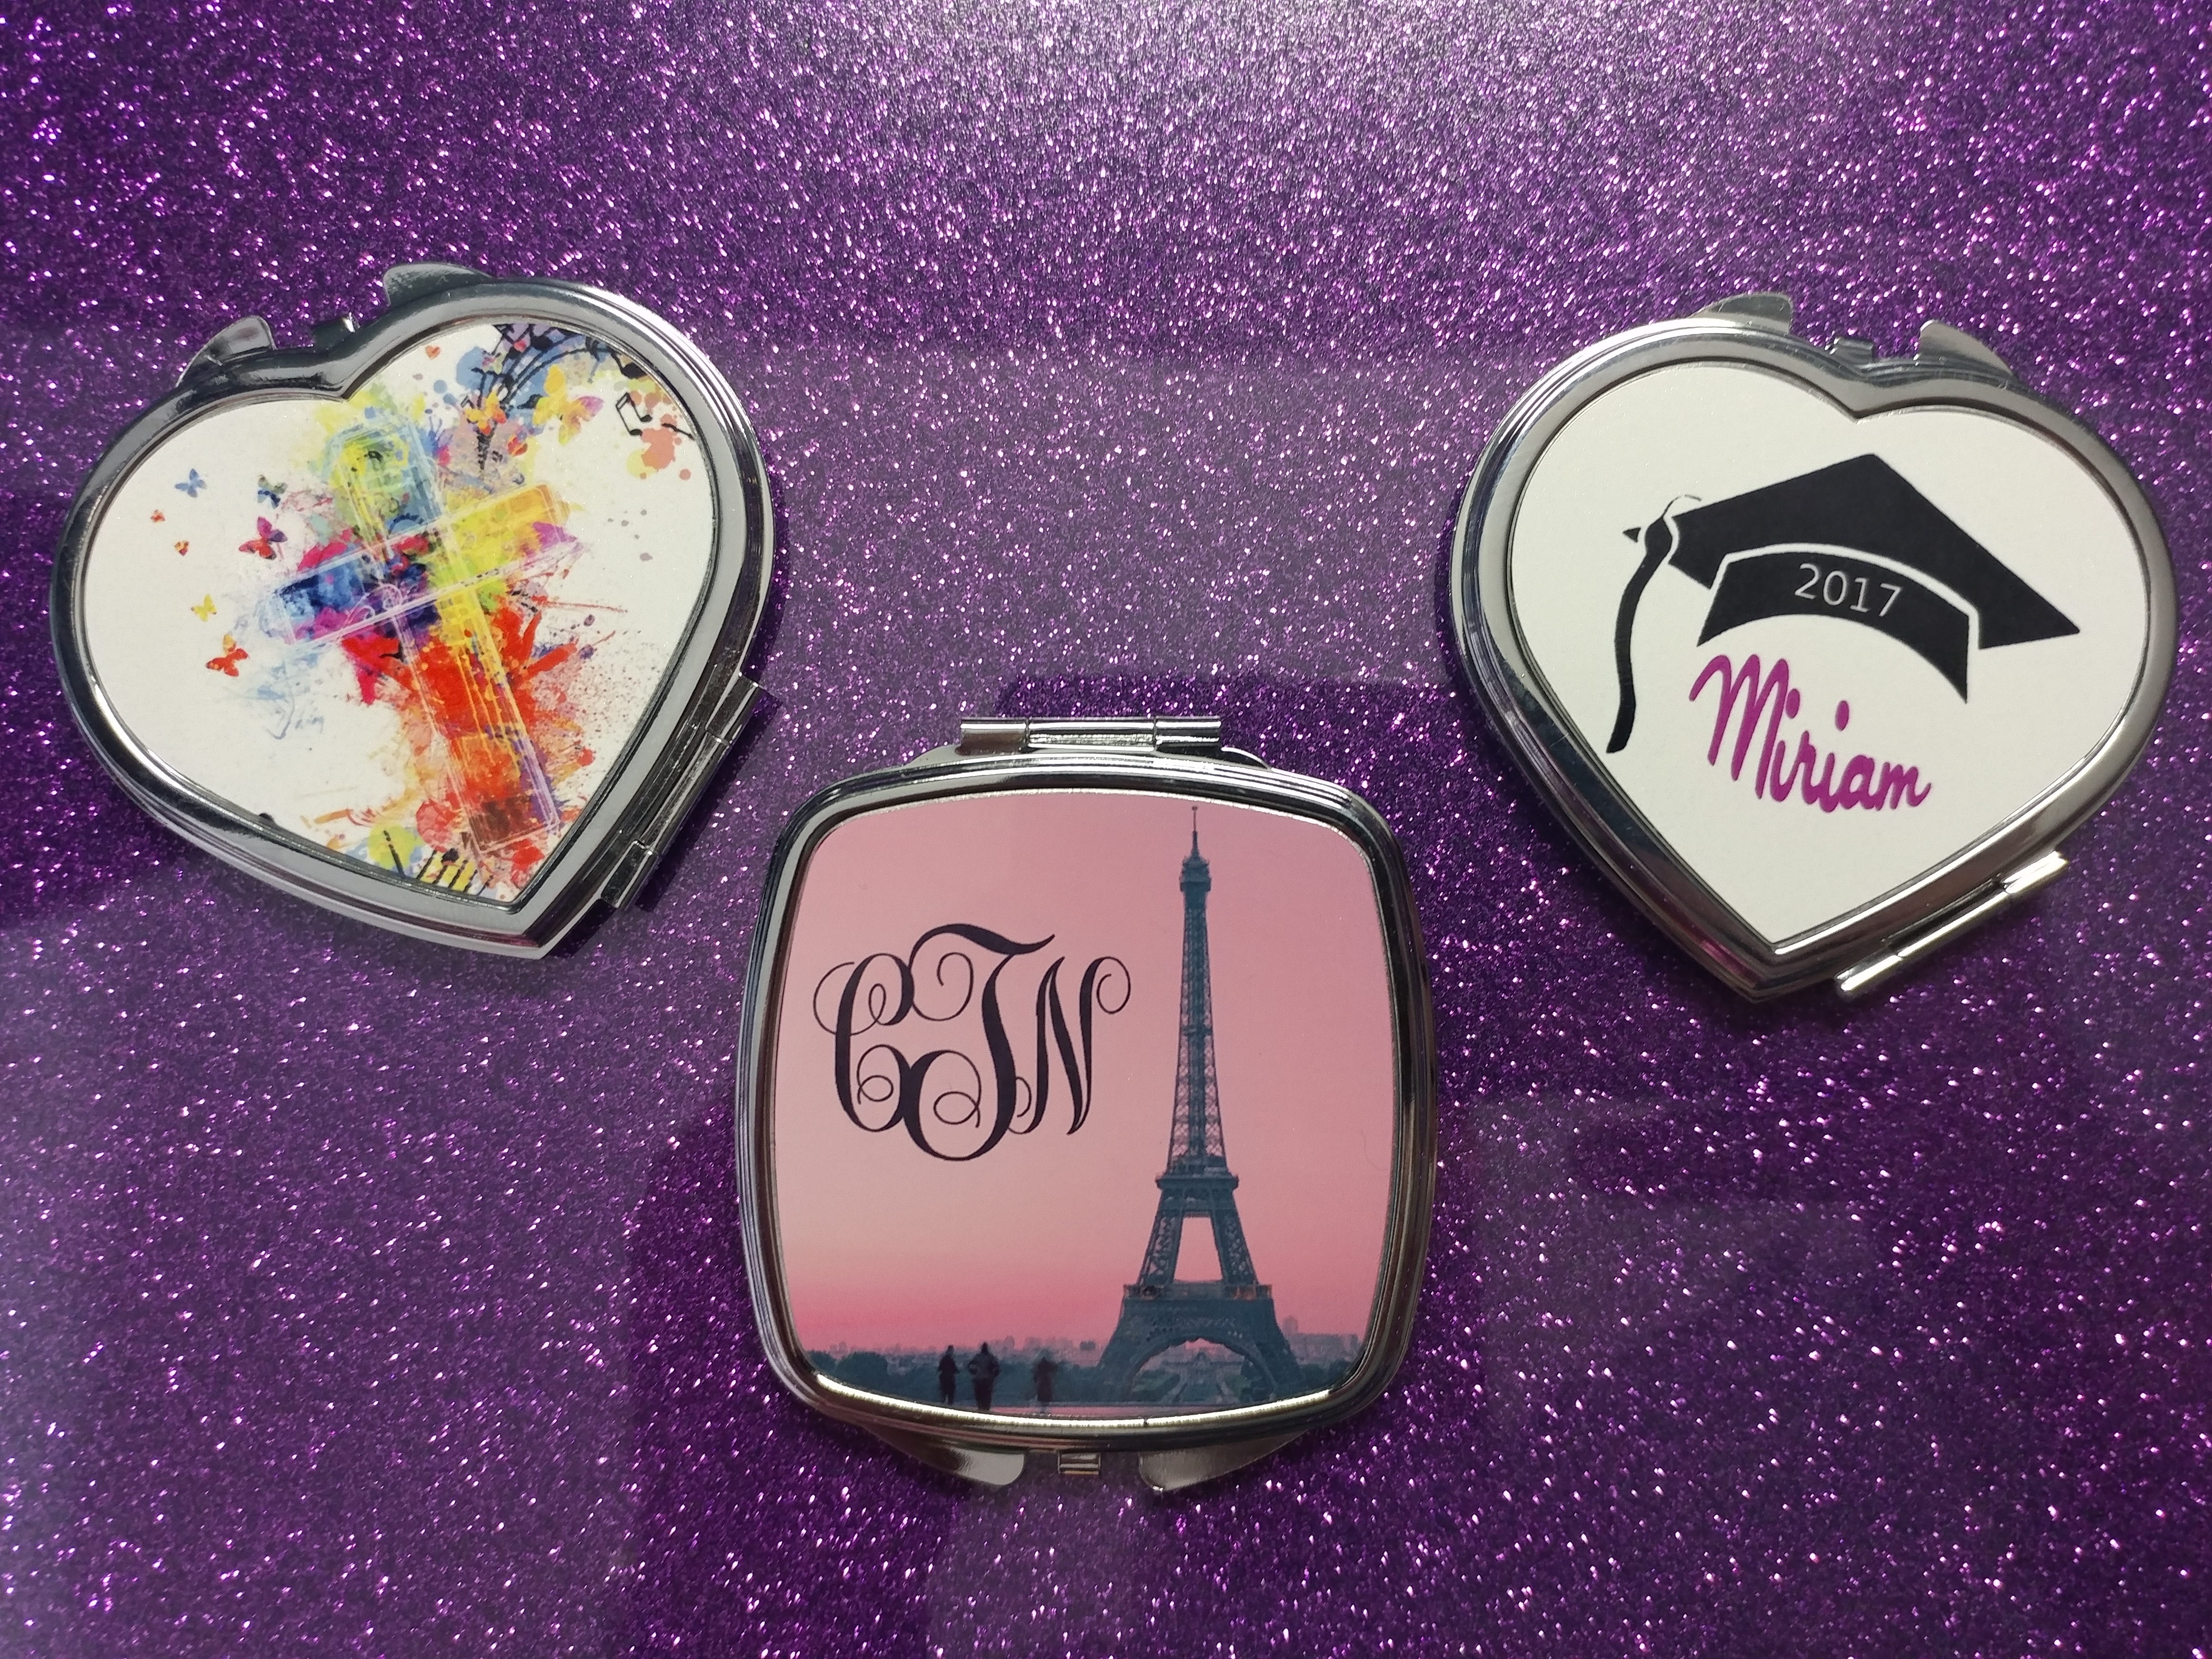 Compacts made with sublimation printing